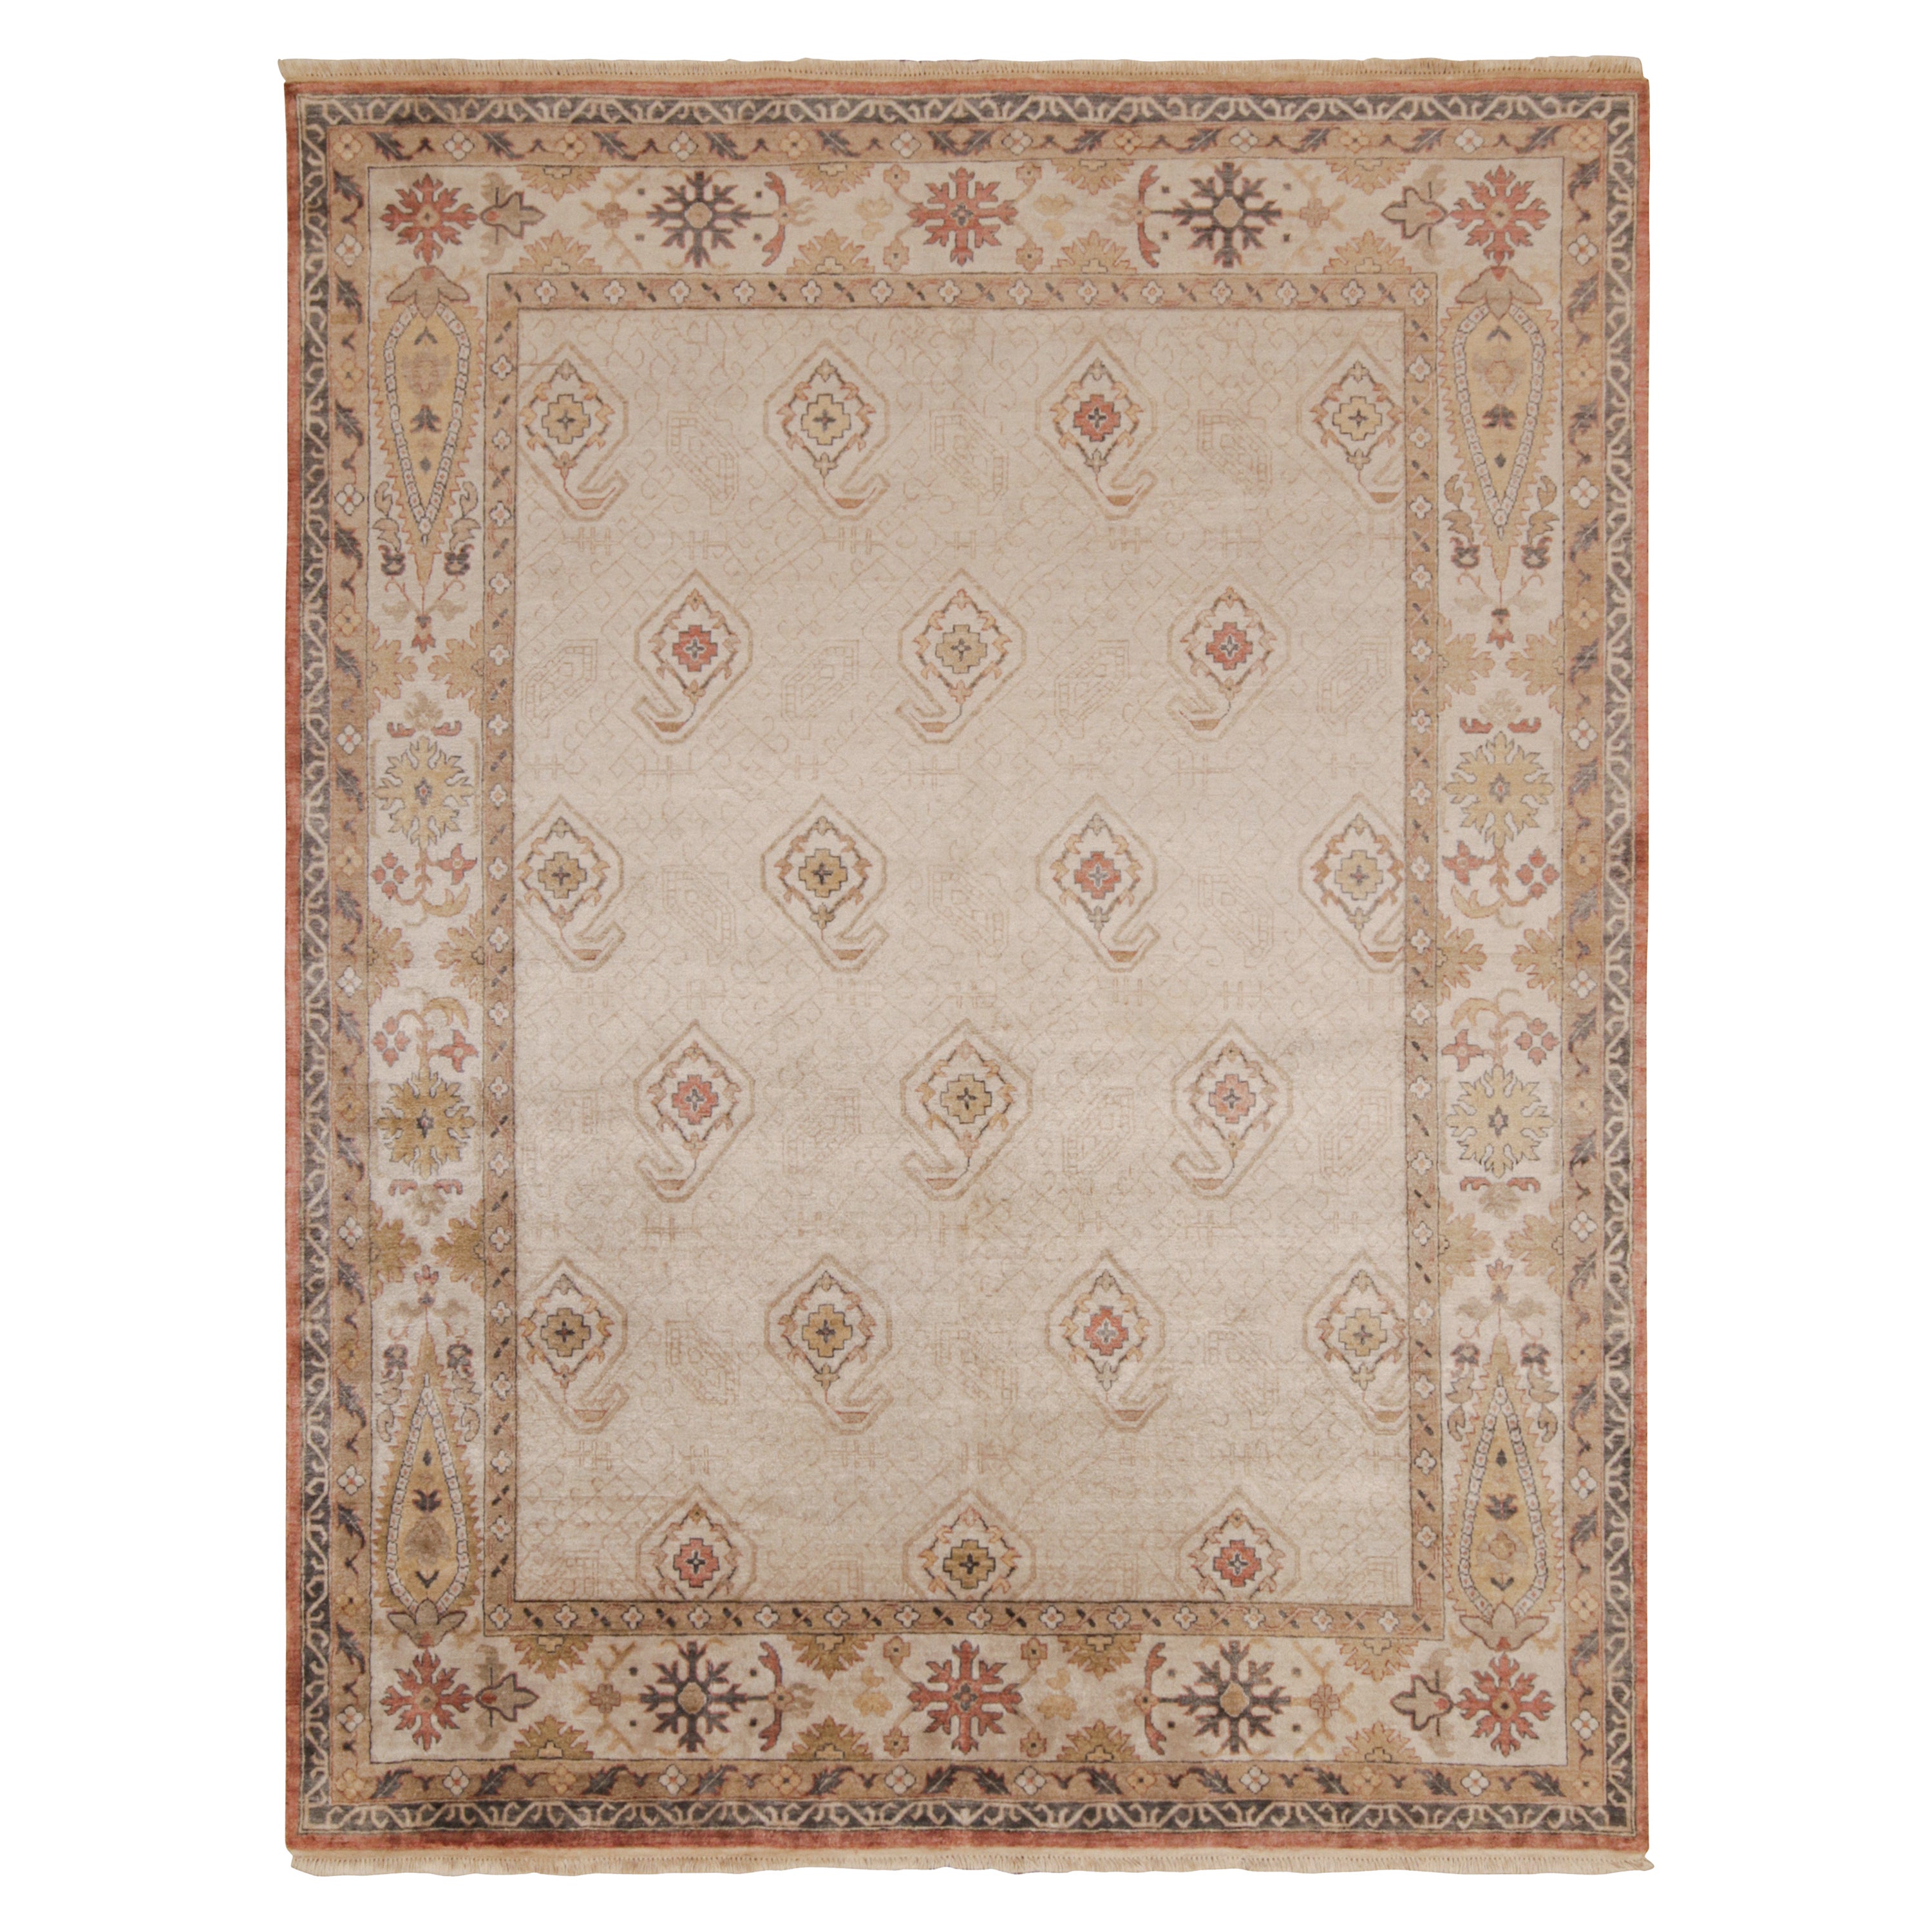 Rug & Kilim’s Classic style rug in Off-White with Beige-Brown Floral Patterns 